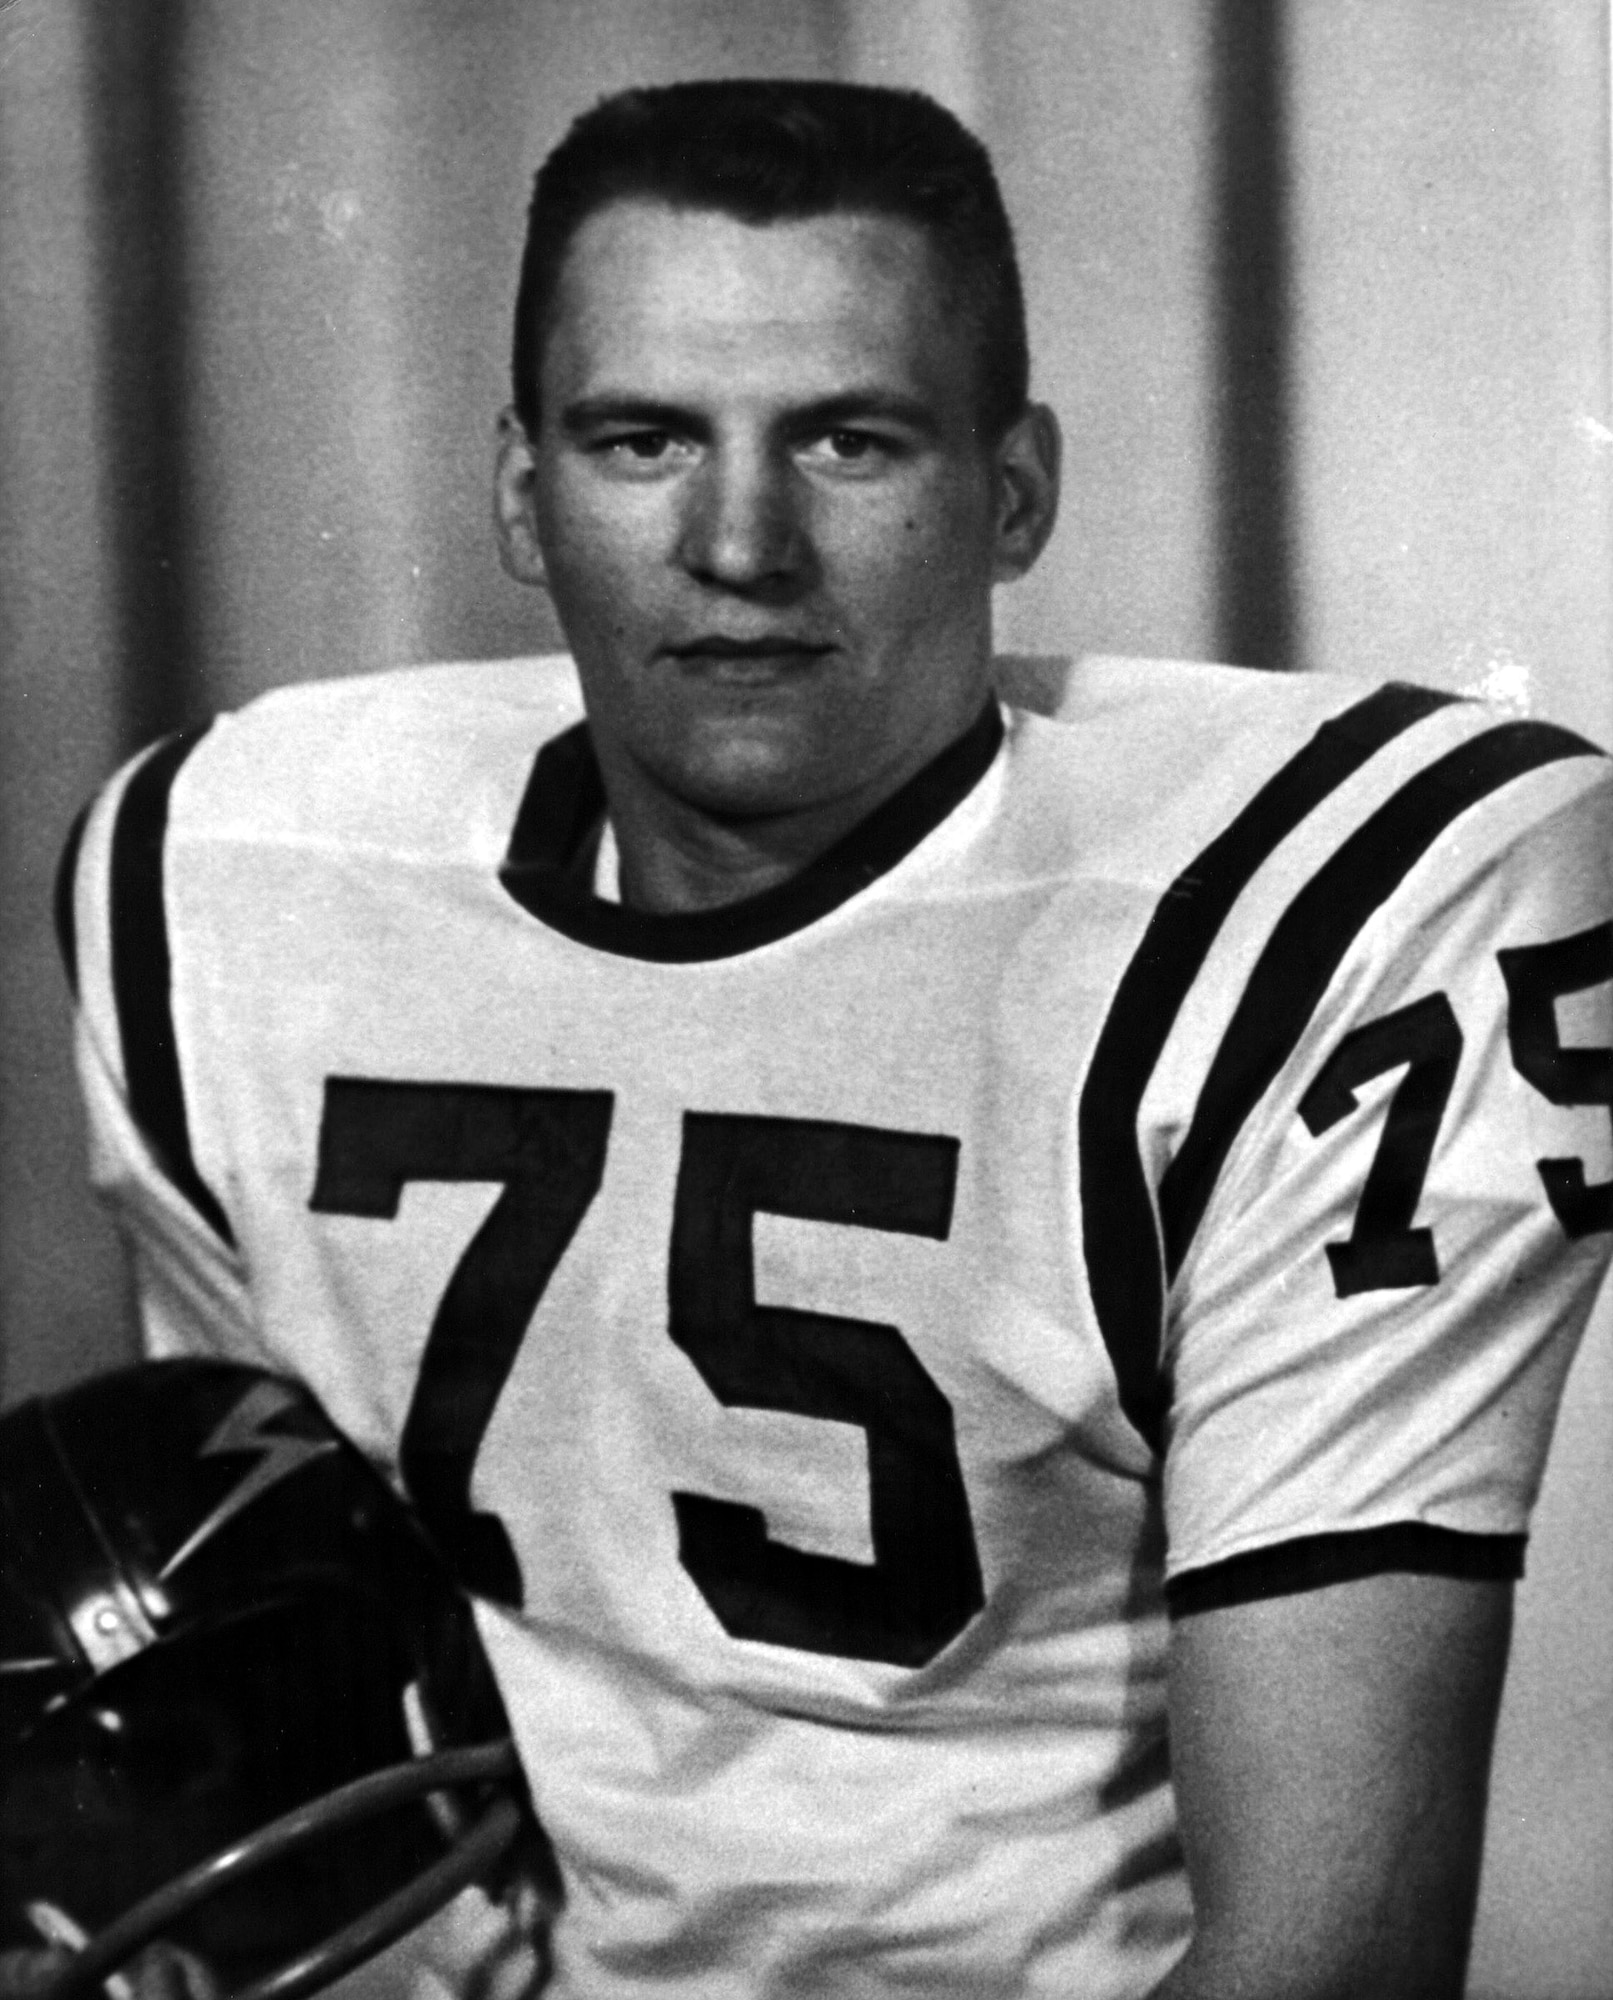 Brock Strom is in the inaugural class for induction into the Air Force Academy Athletic Hall of Fame. The 1959 Air Force Academy graduate was the captain of the academy's undefeated football team in 1958 and helped lead the team to the Cotton Bowl. (U.S. Air Force photo)